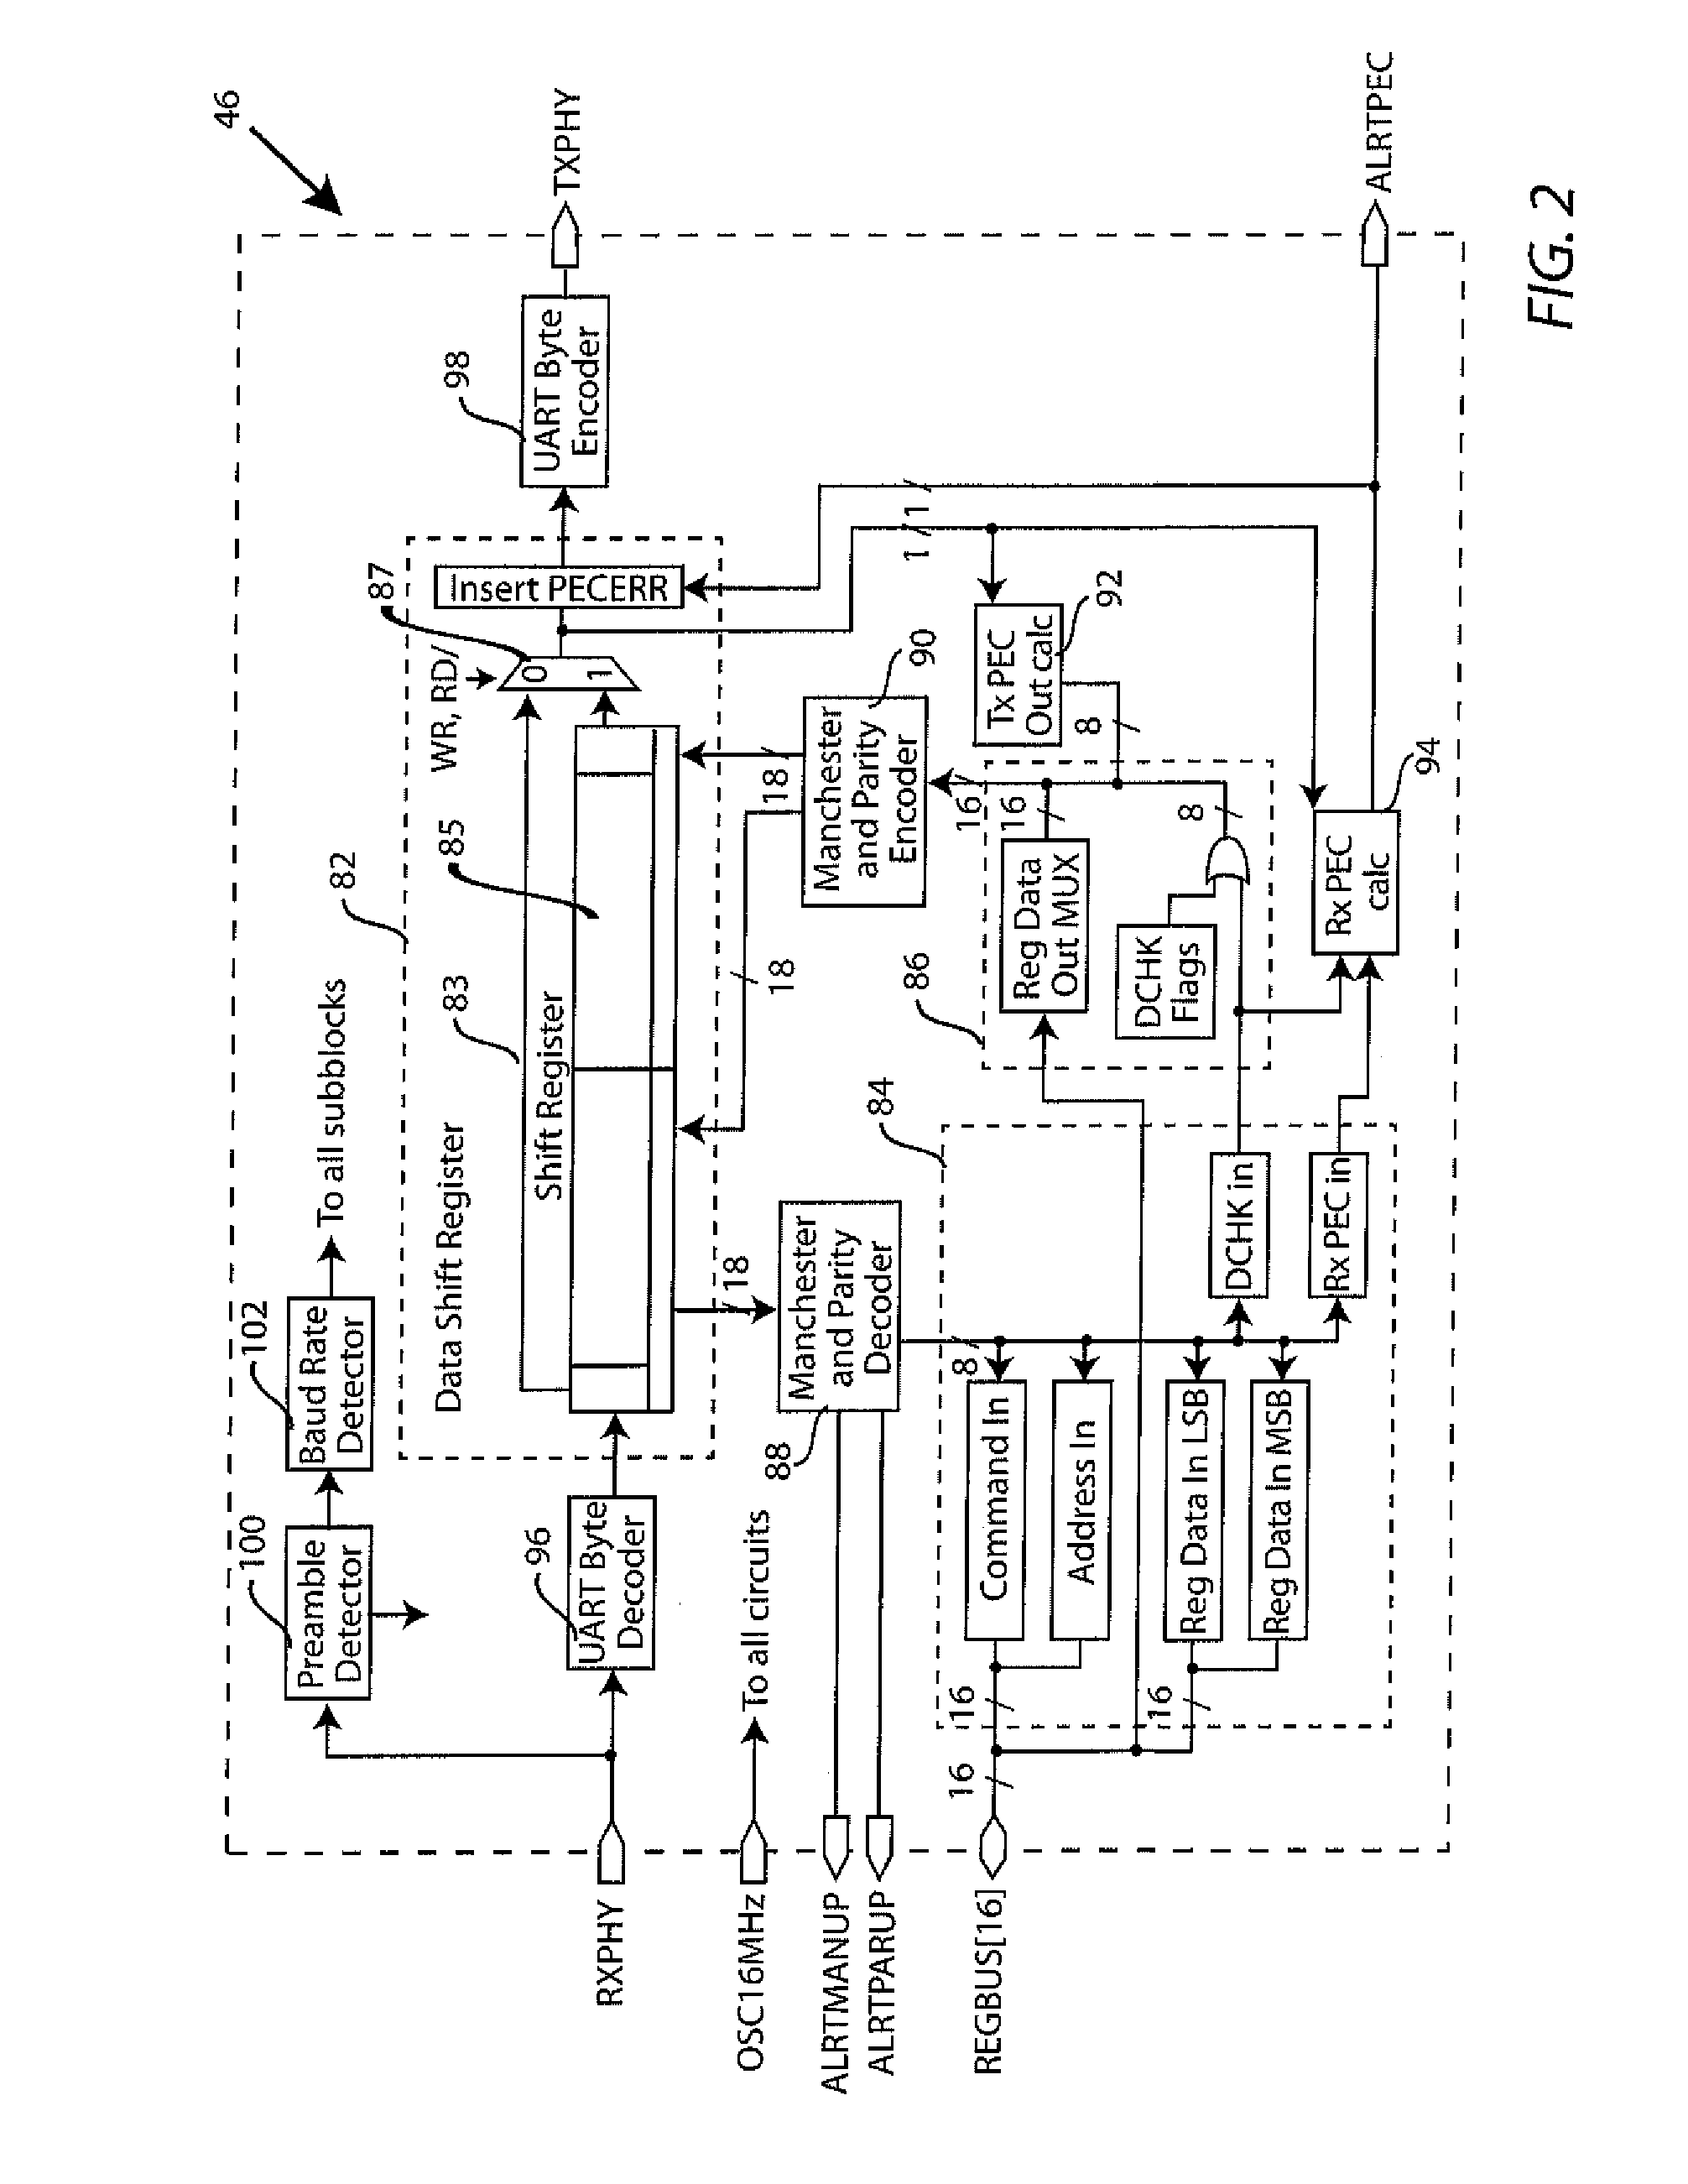 Integrated standard-compliant data acquisition device